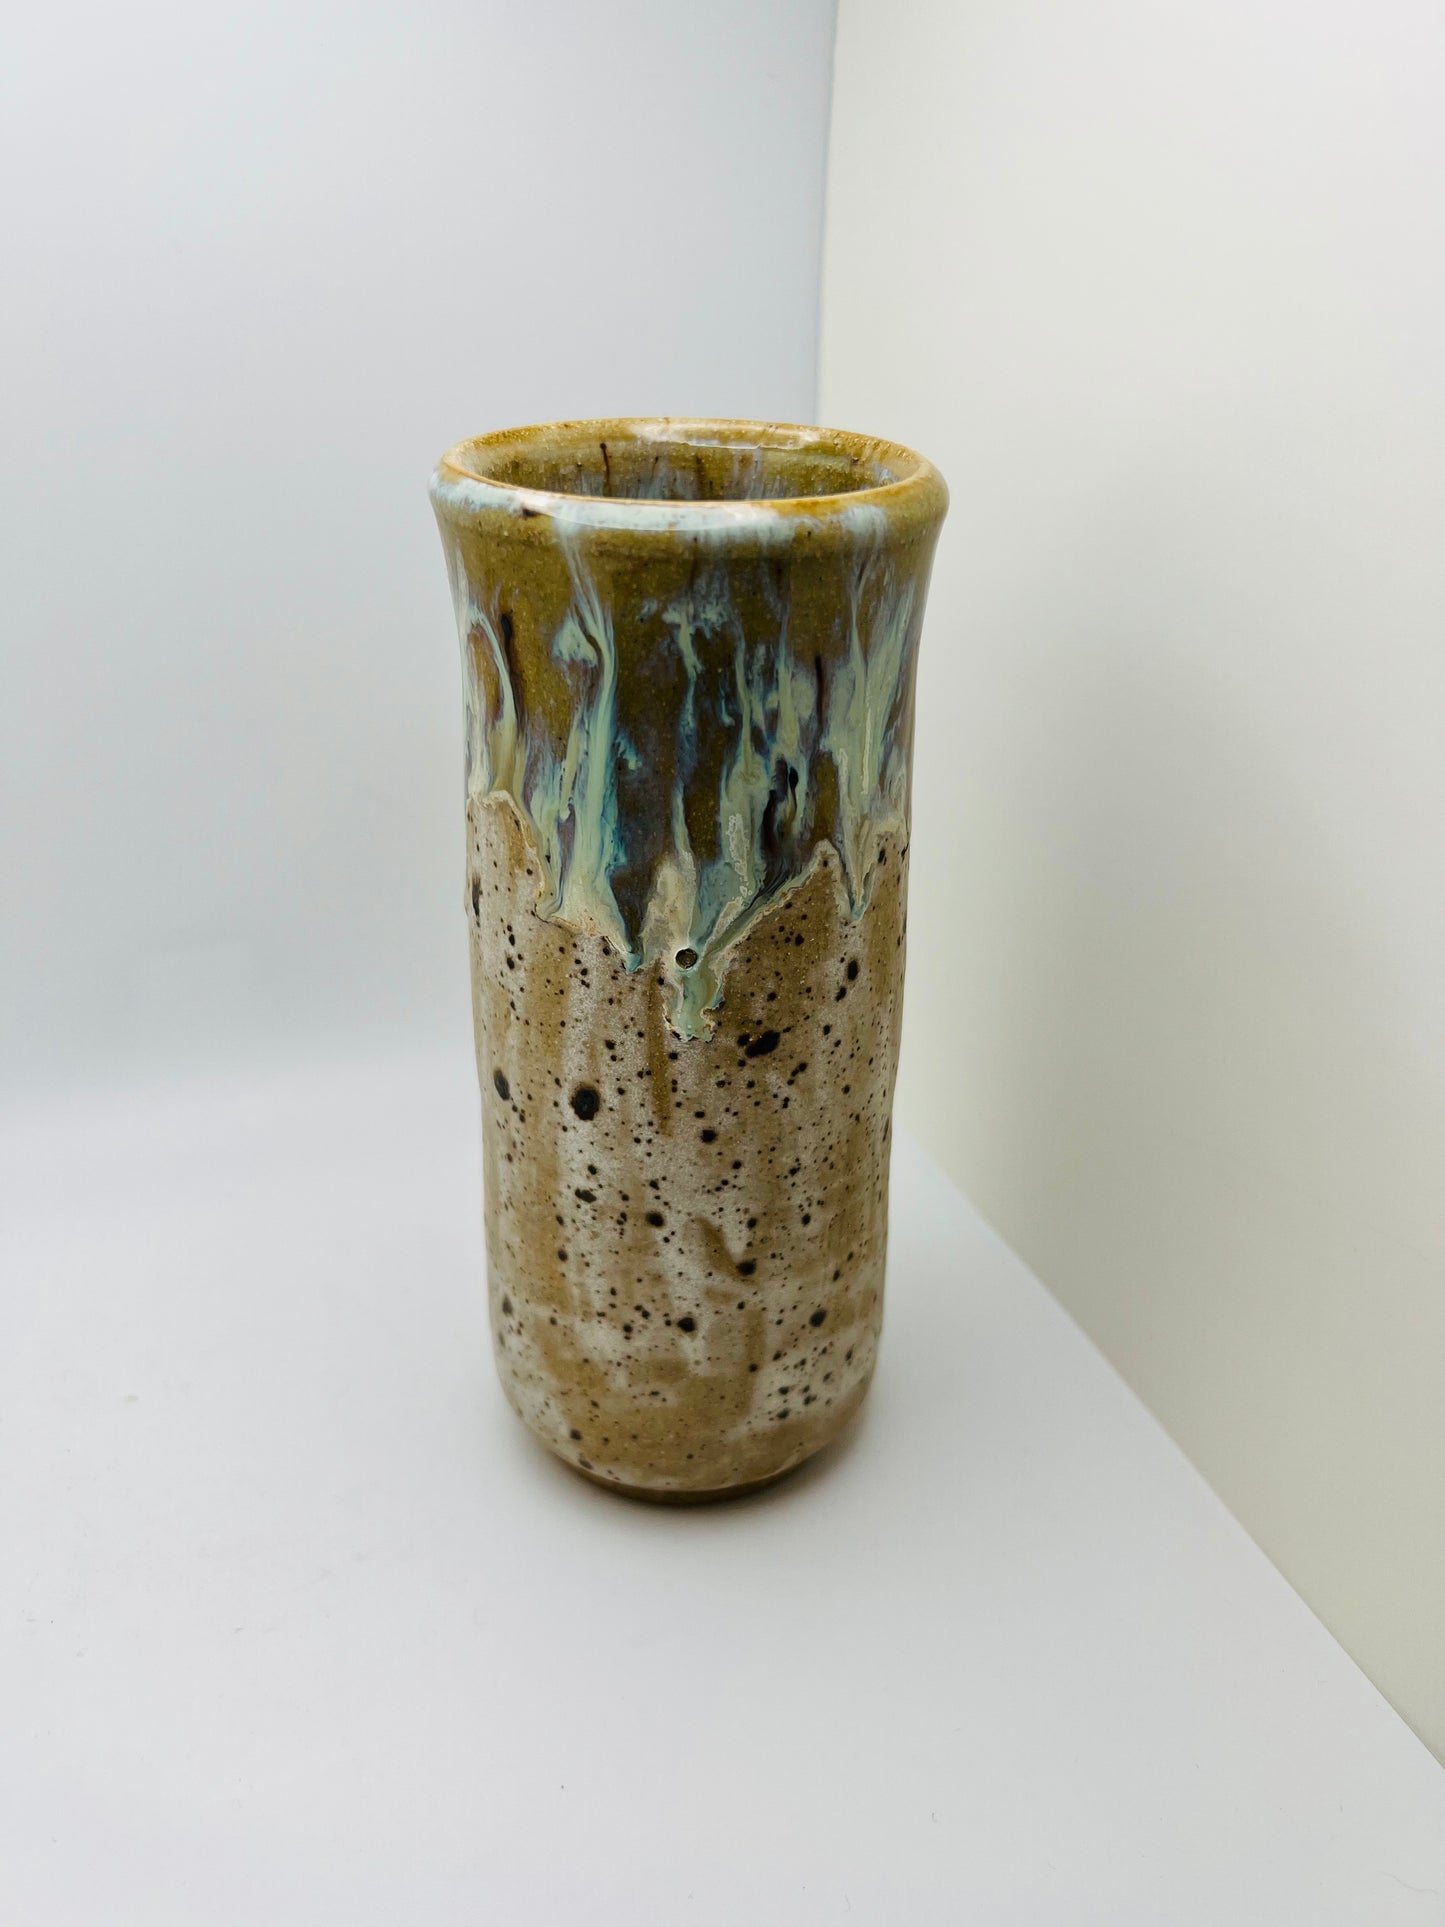 Small white and brown vase